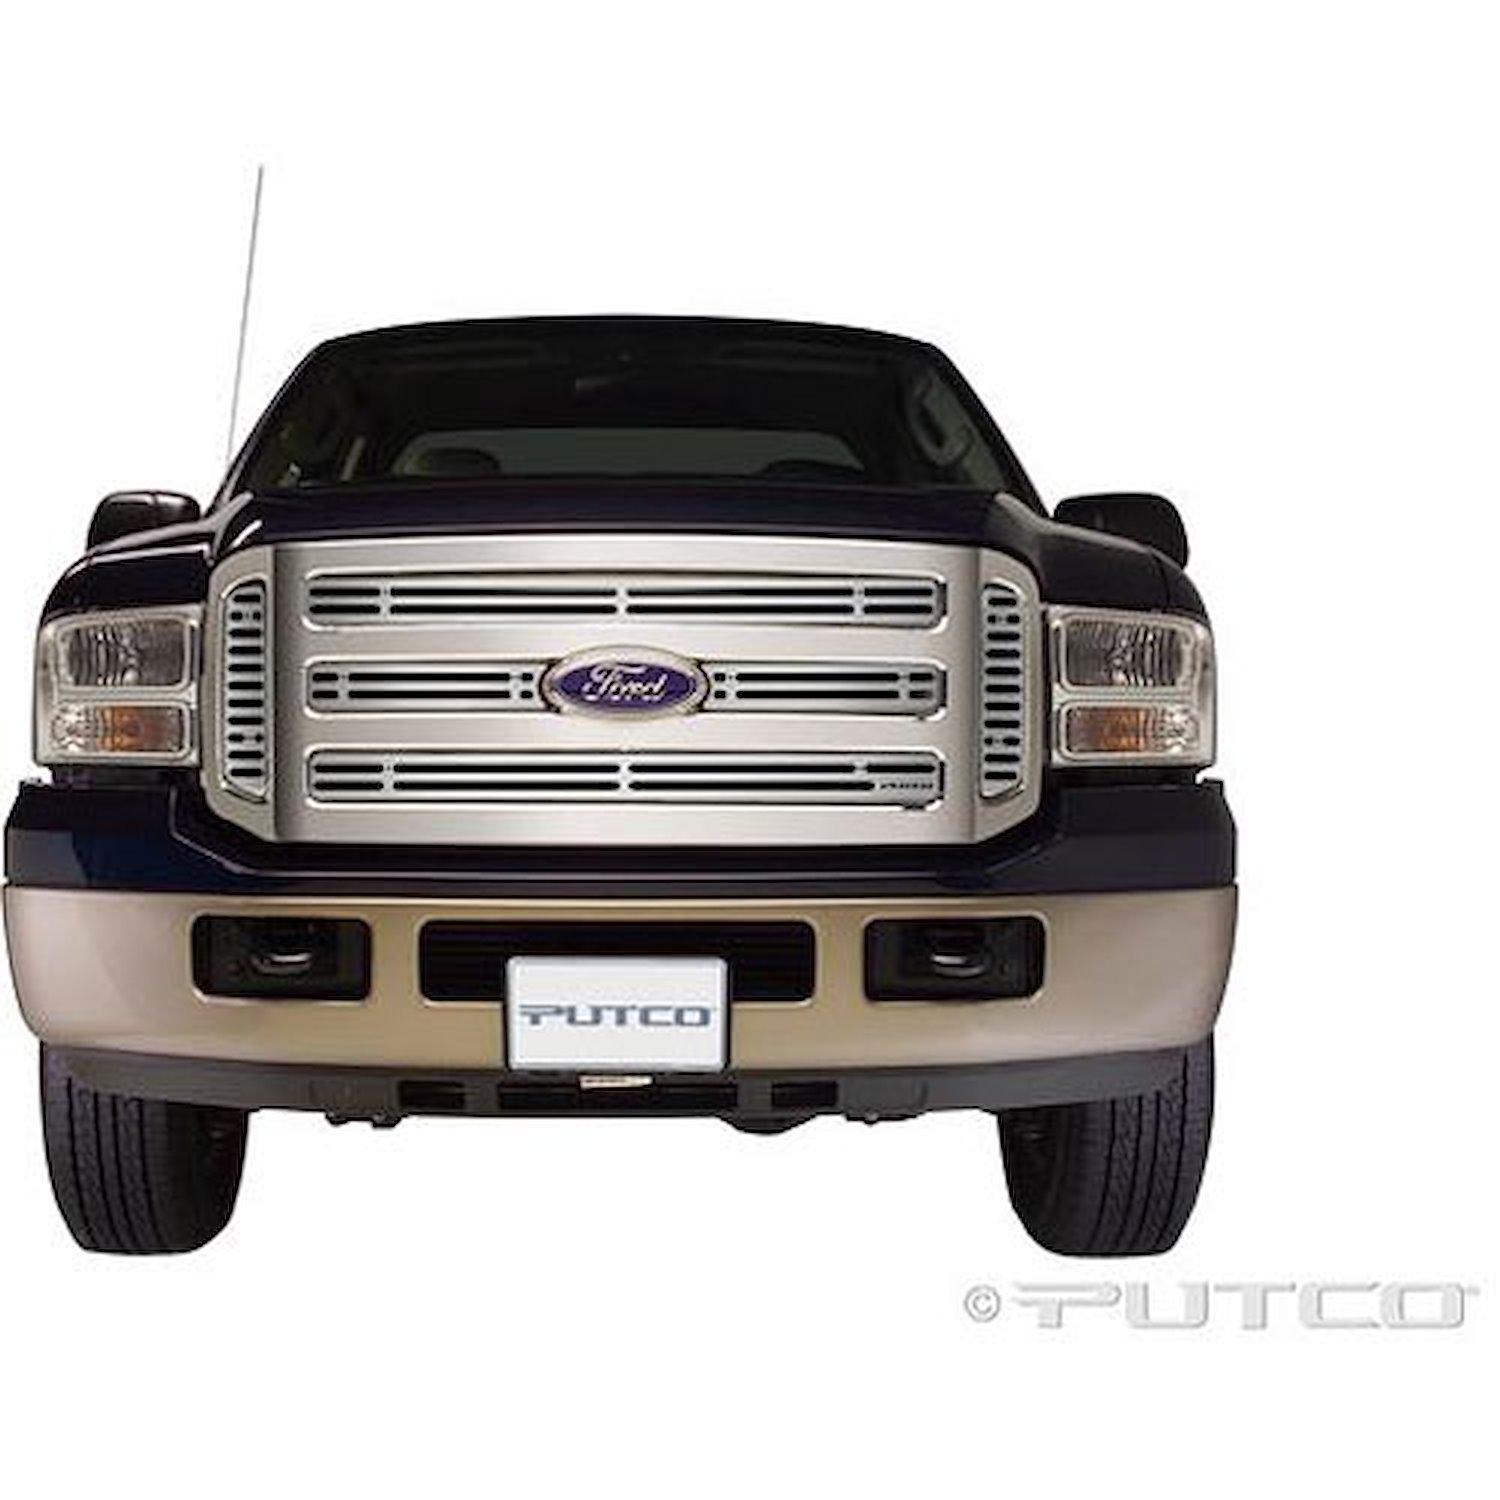 Ford Super Duty - Including Side Vents